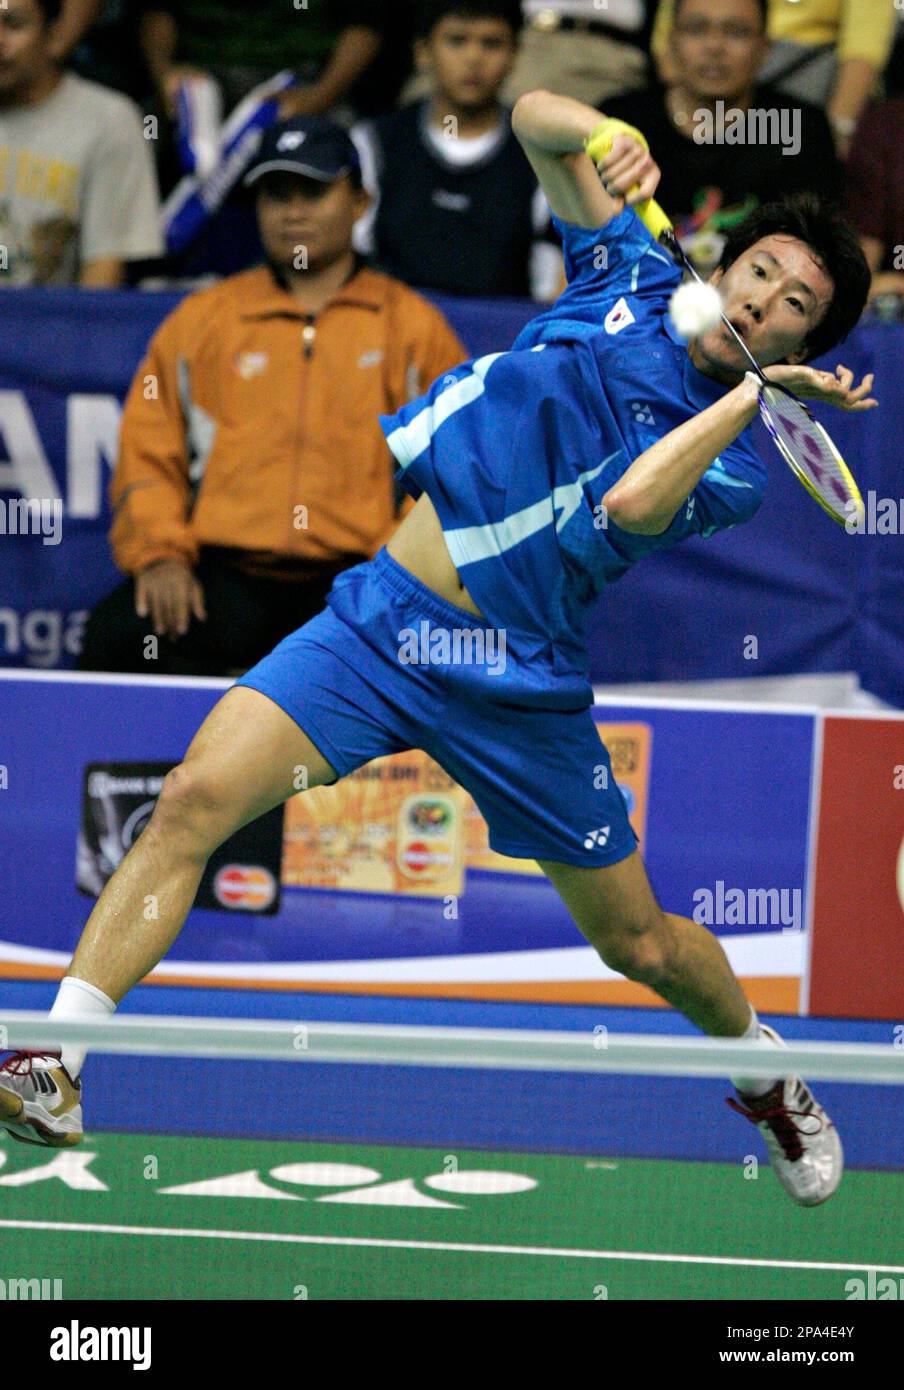 South Koreas Park Sung Hong returns a shot to Chinas Lin Dan during their Thomas Cup final badminton match, Sunday May 18, 2008 in Jakarta, Indonesia